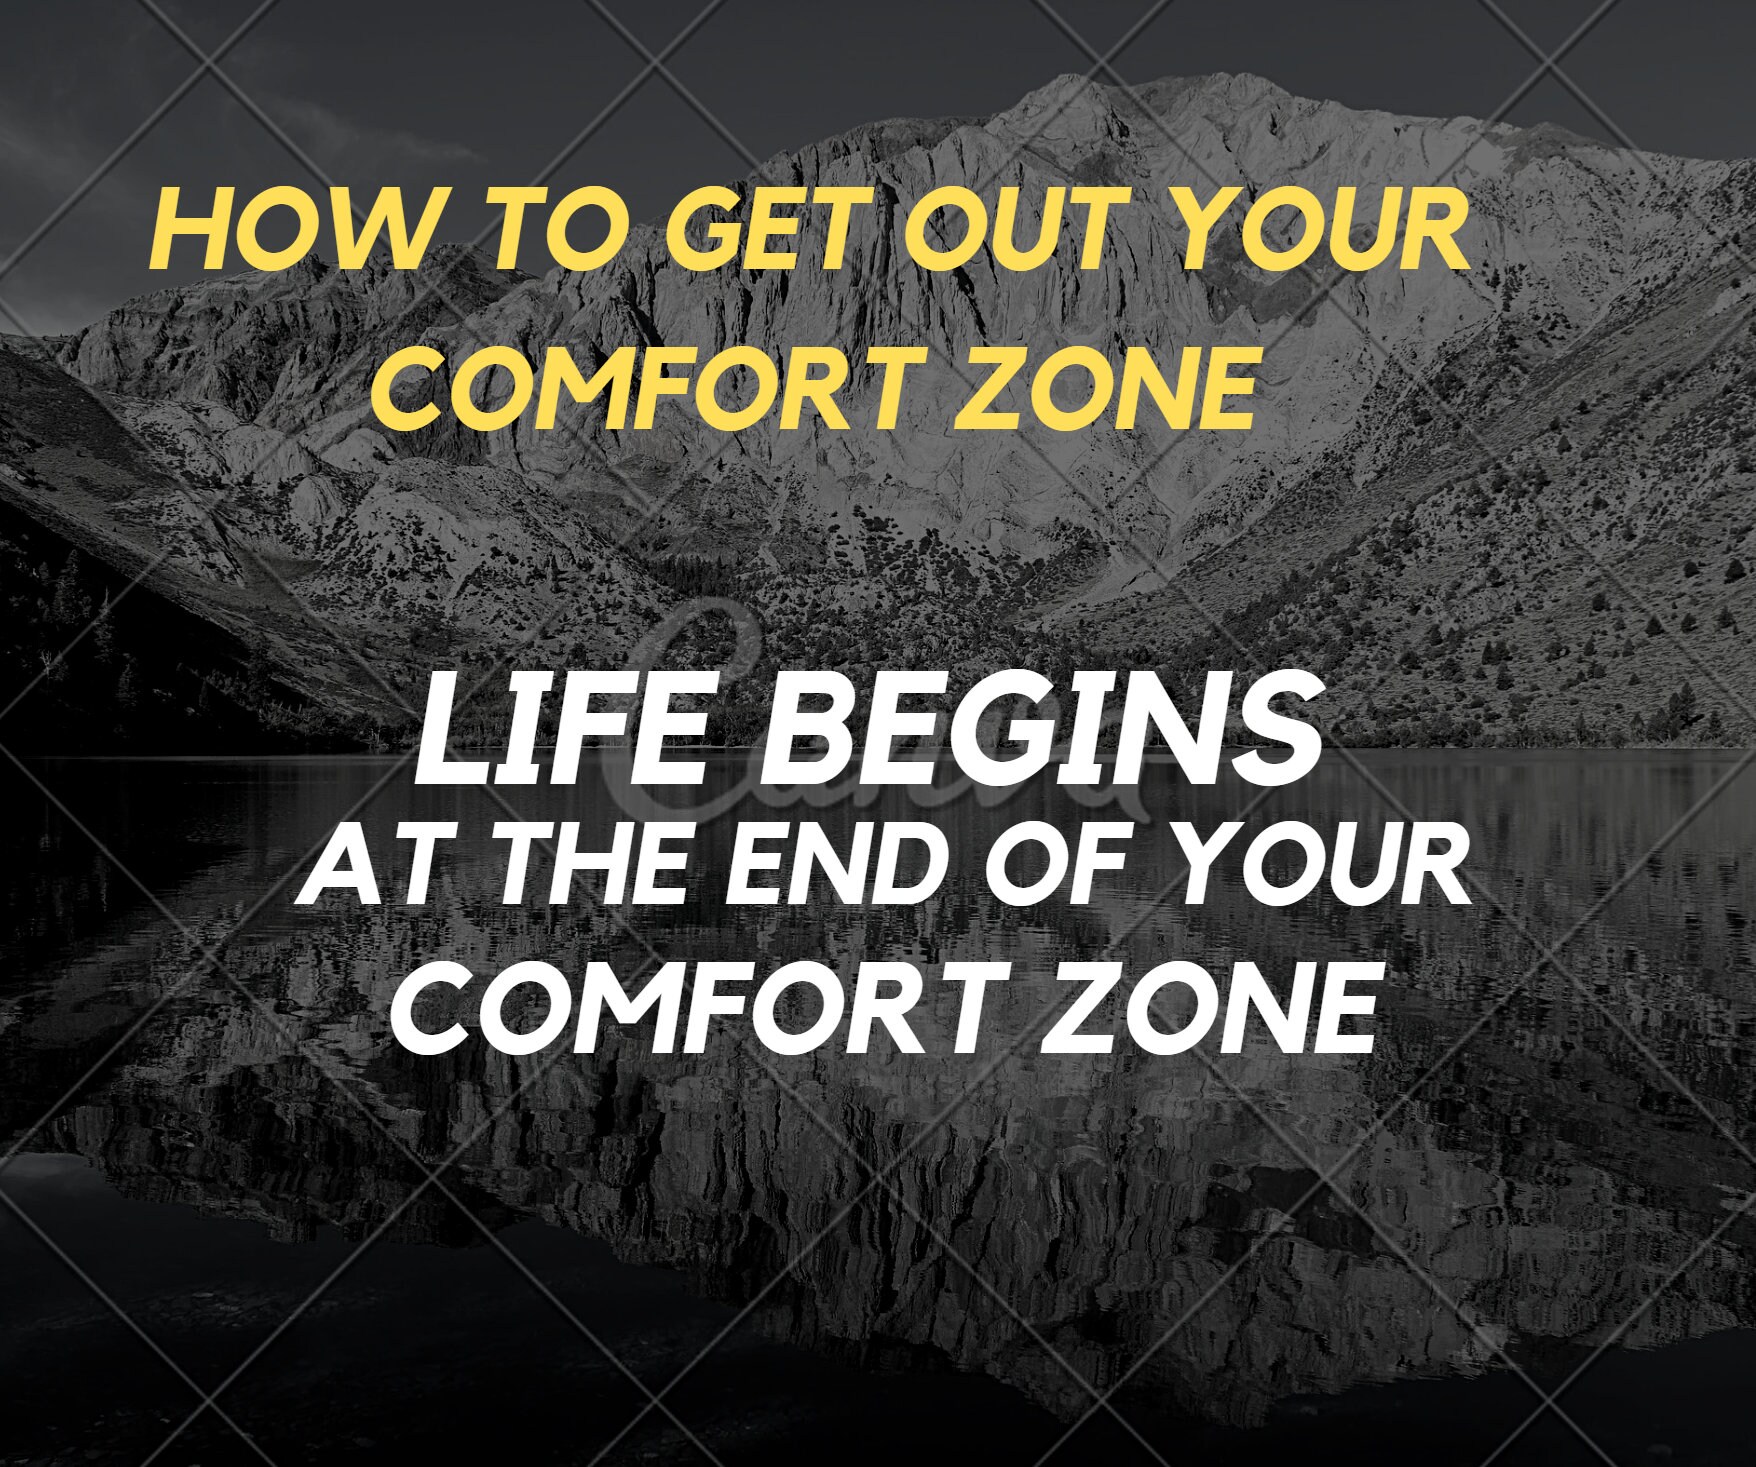 77 Comfort Zone Quotes That Will Inspire You to Take Action Today